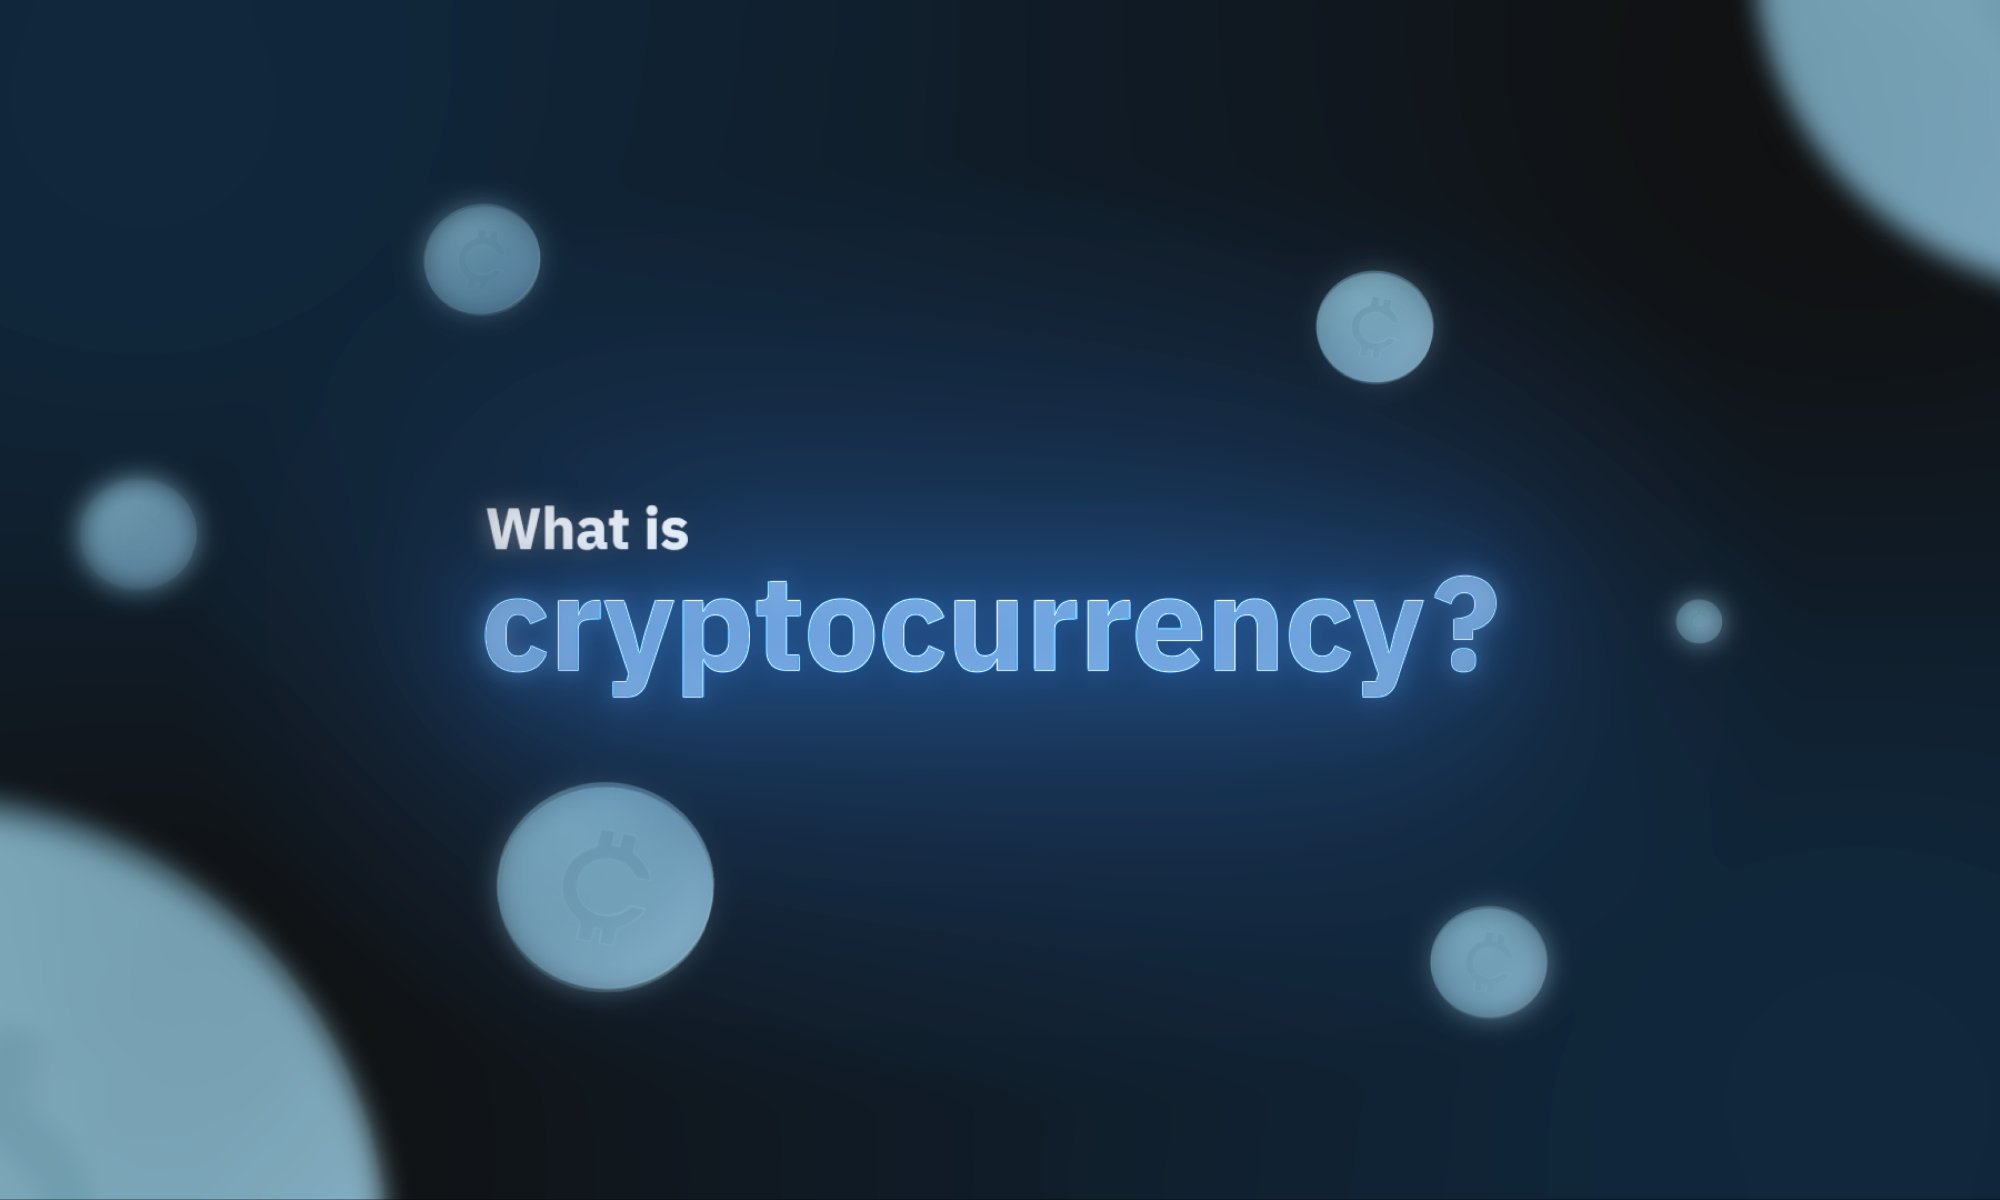 text that says "what is cryptocurrency?"